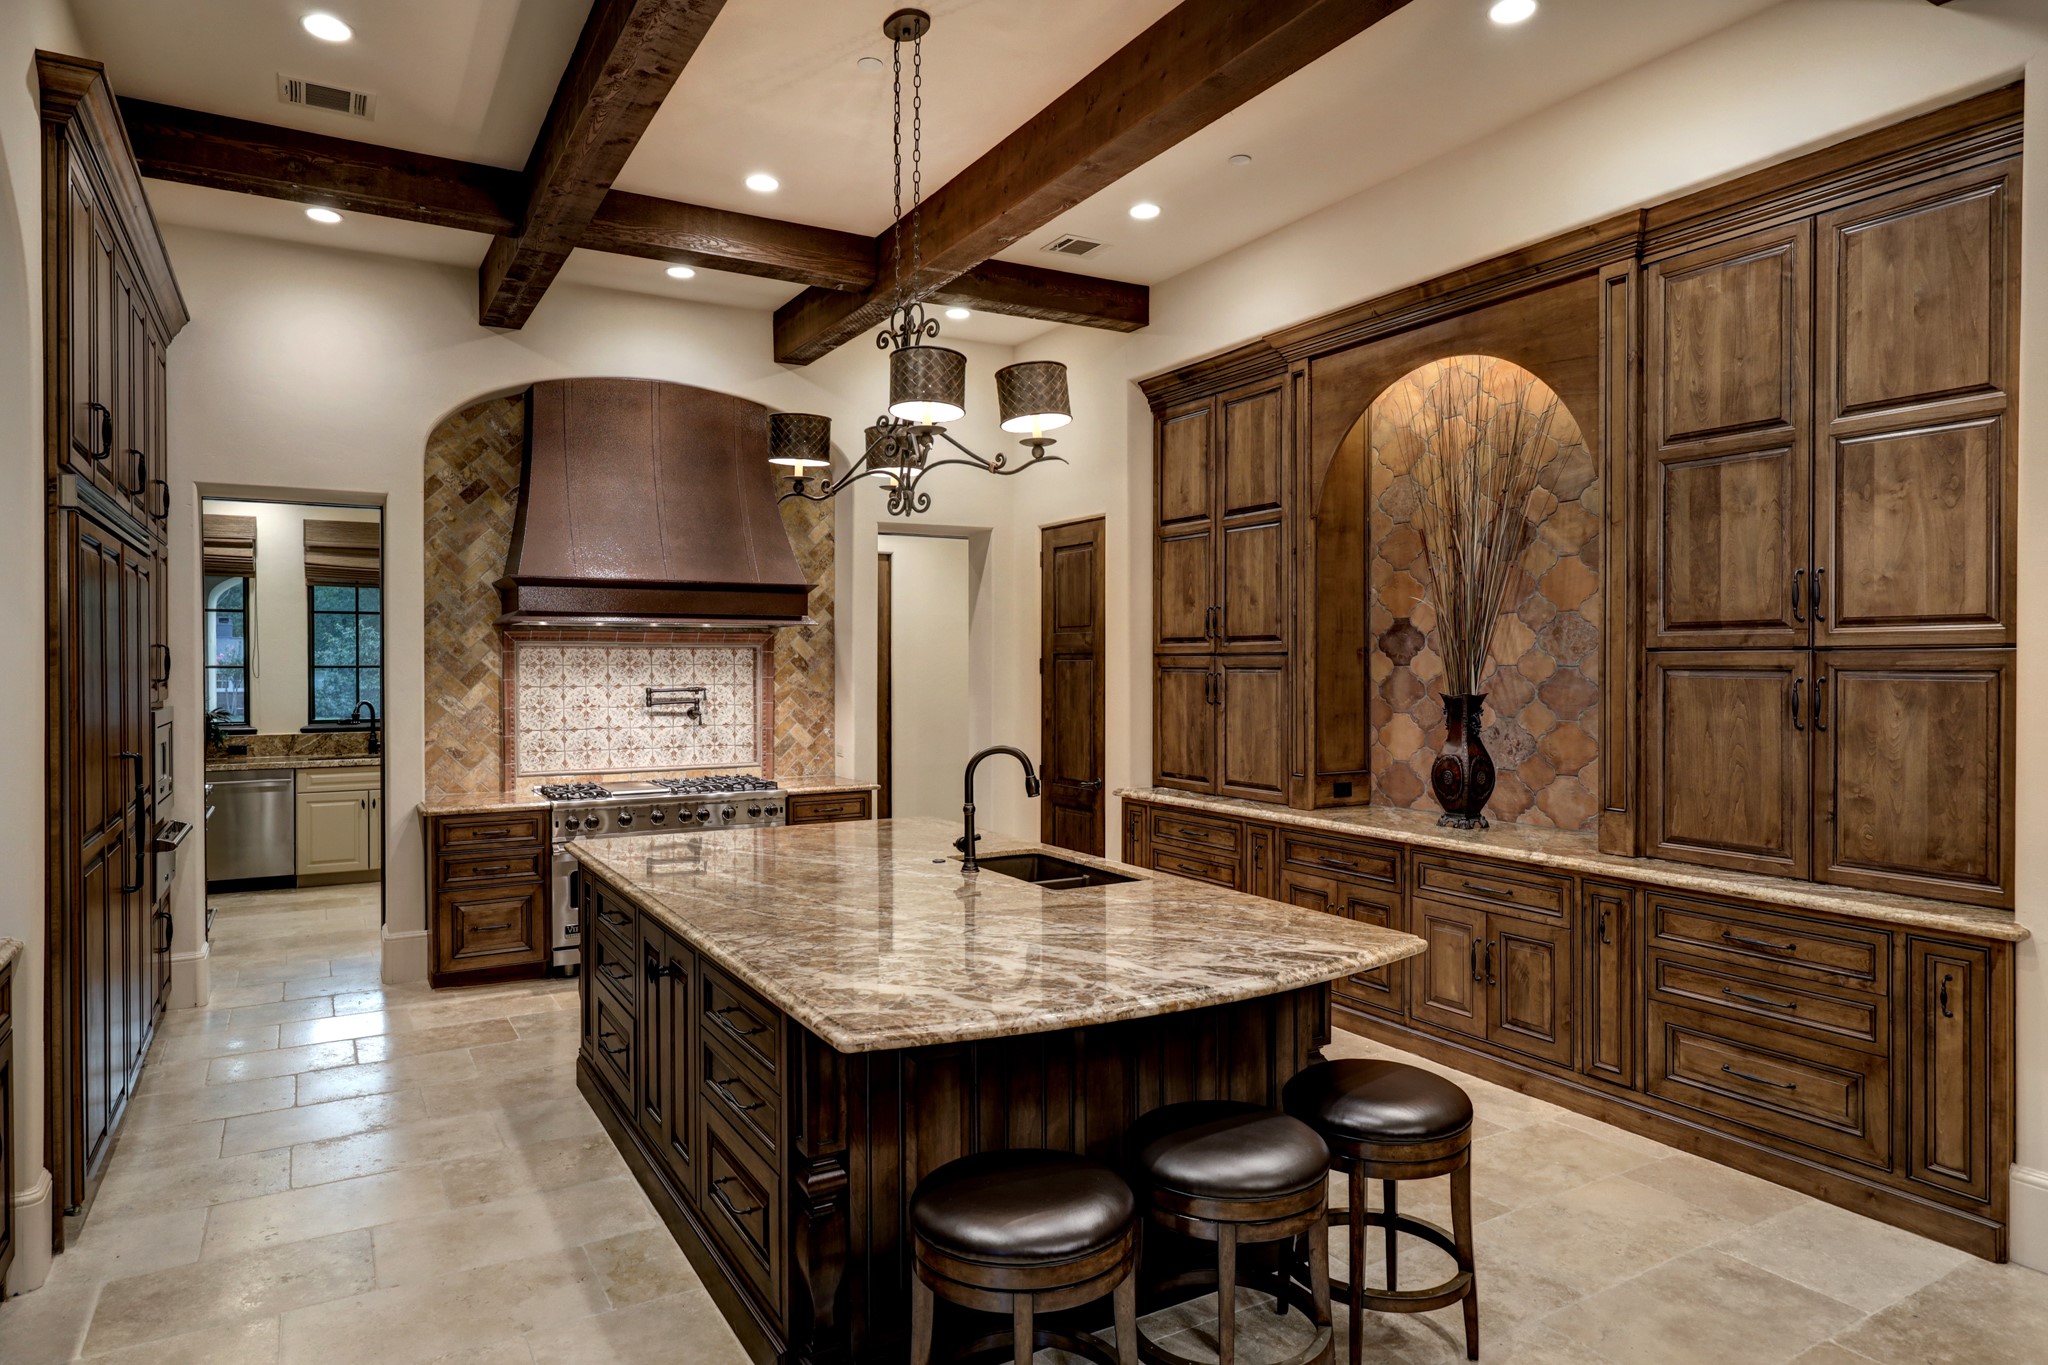 Custom wooden cabinetry, copper hooded air vent and rich detailed brick & tile work